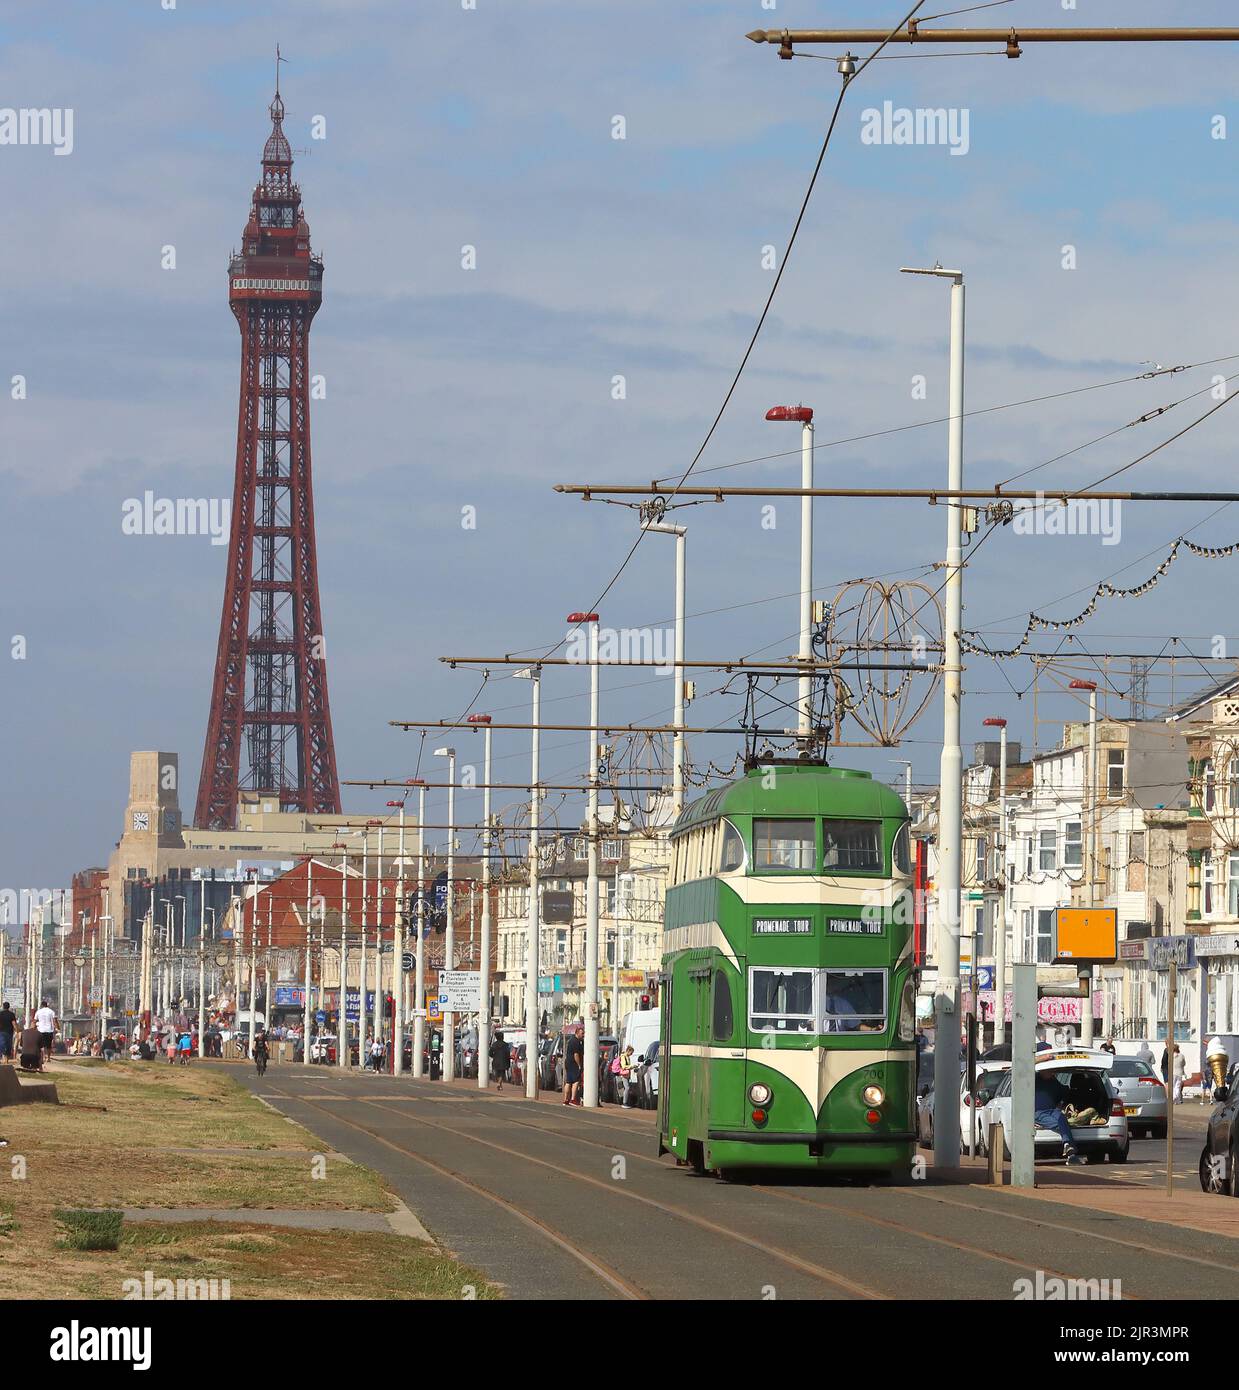 Blackpool promenade & tower with a 1930s heritage green and cream English Electric Balloon tram number 700, Lancashire seaside, England, UK Stock Photo